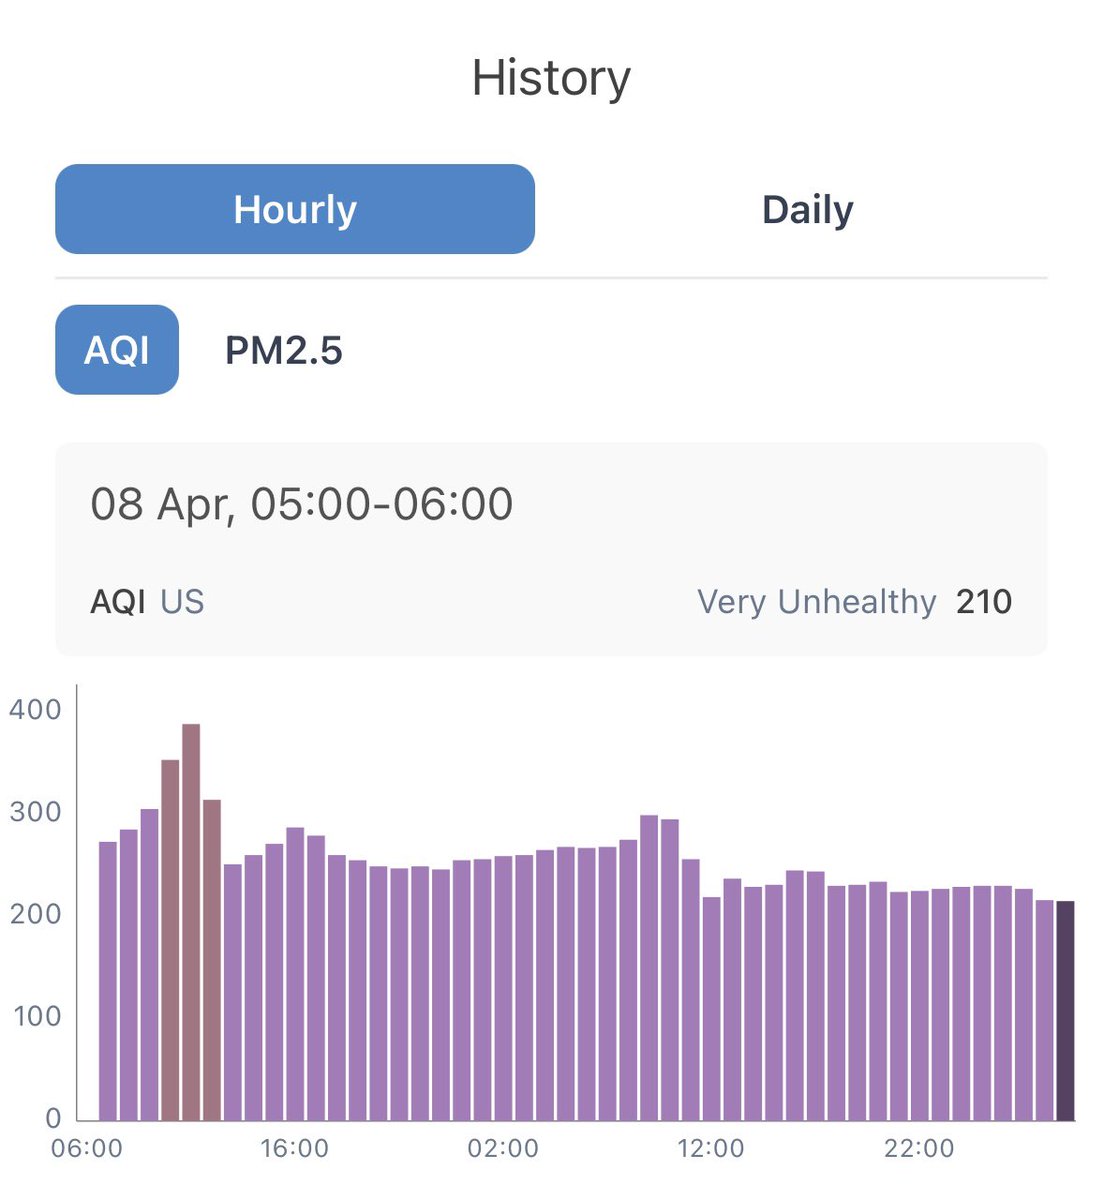 You know you’re in #NorthThailand in April when you can celebrate that for only 3 1/2 hour periods yesterday was the air actively hazardous! #AirPollution #Crisis iqair.com/thailand/chian…